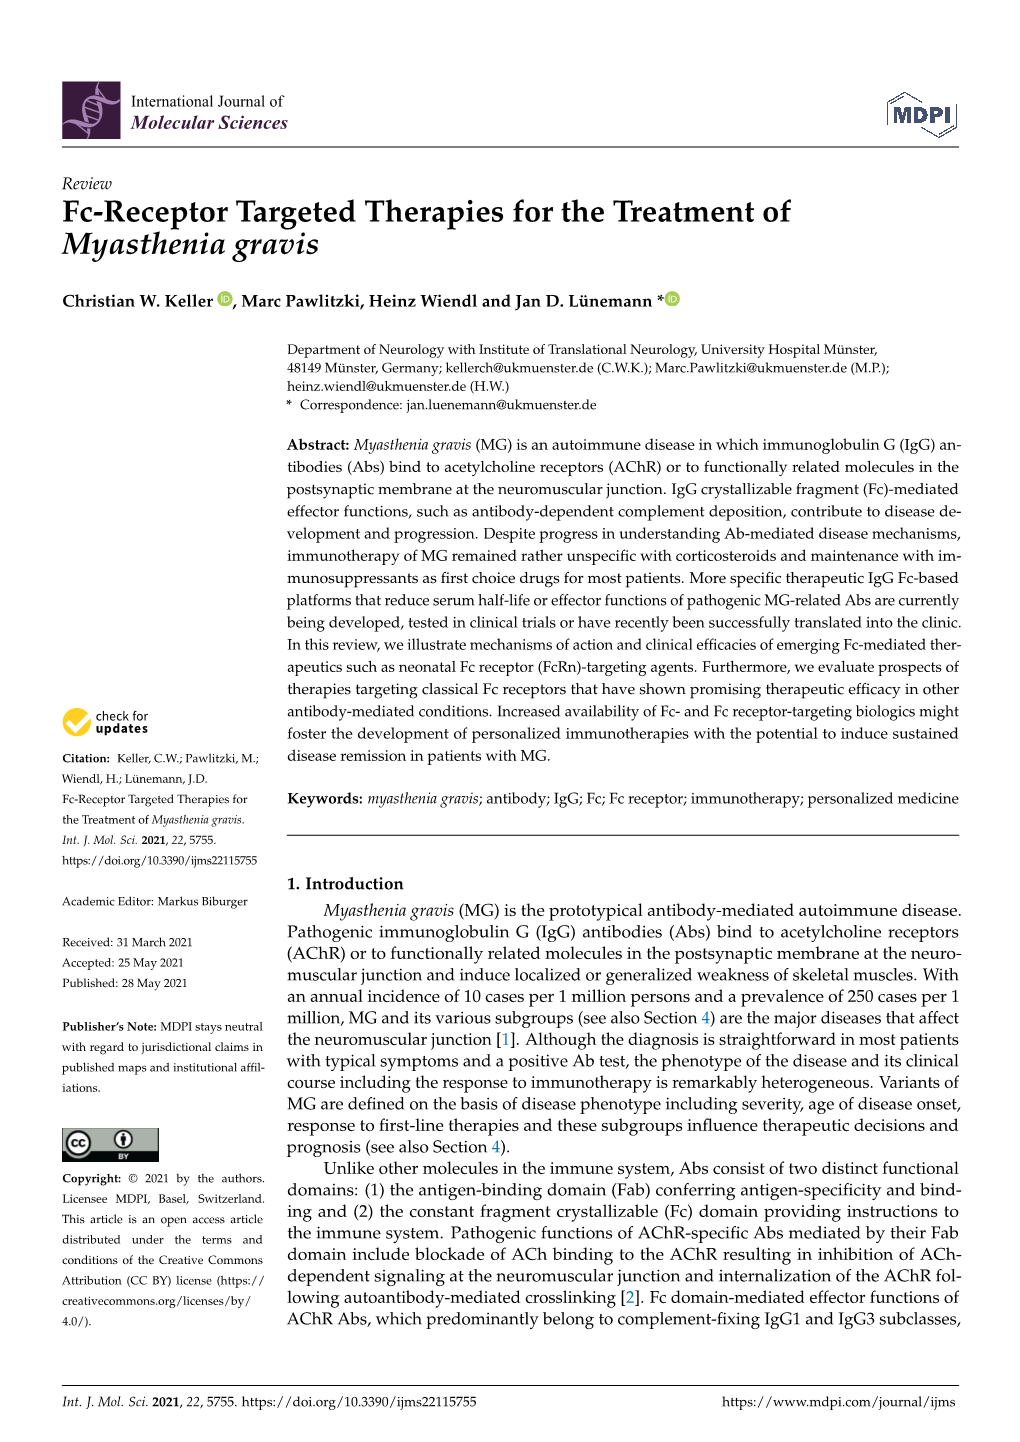 Fc-Receptor Targeted Therapies for the Treatment of Myasthenia Gravis